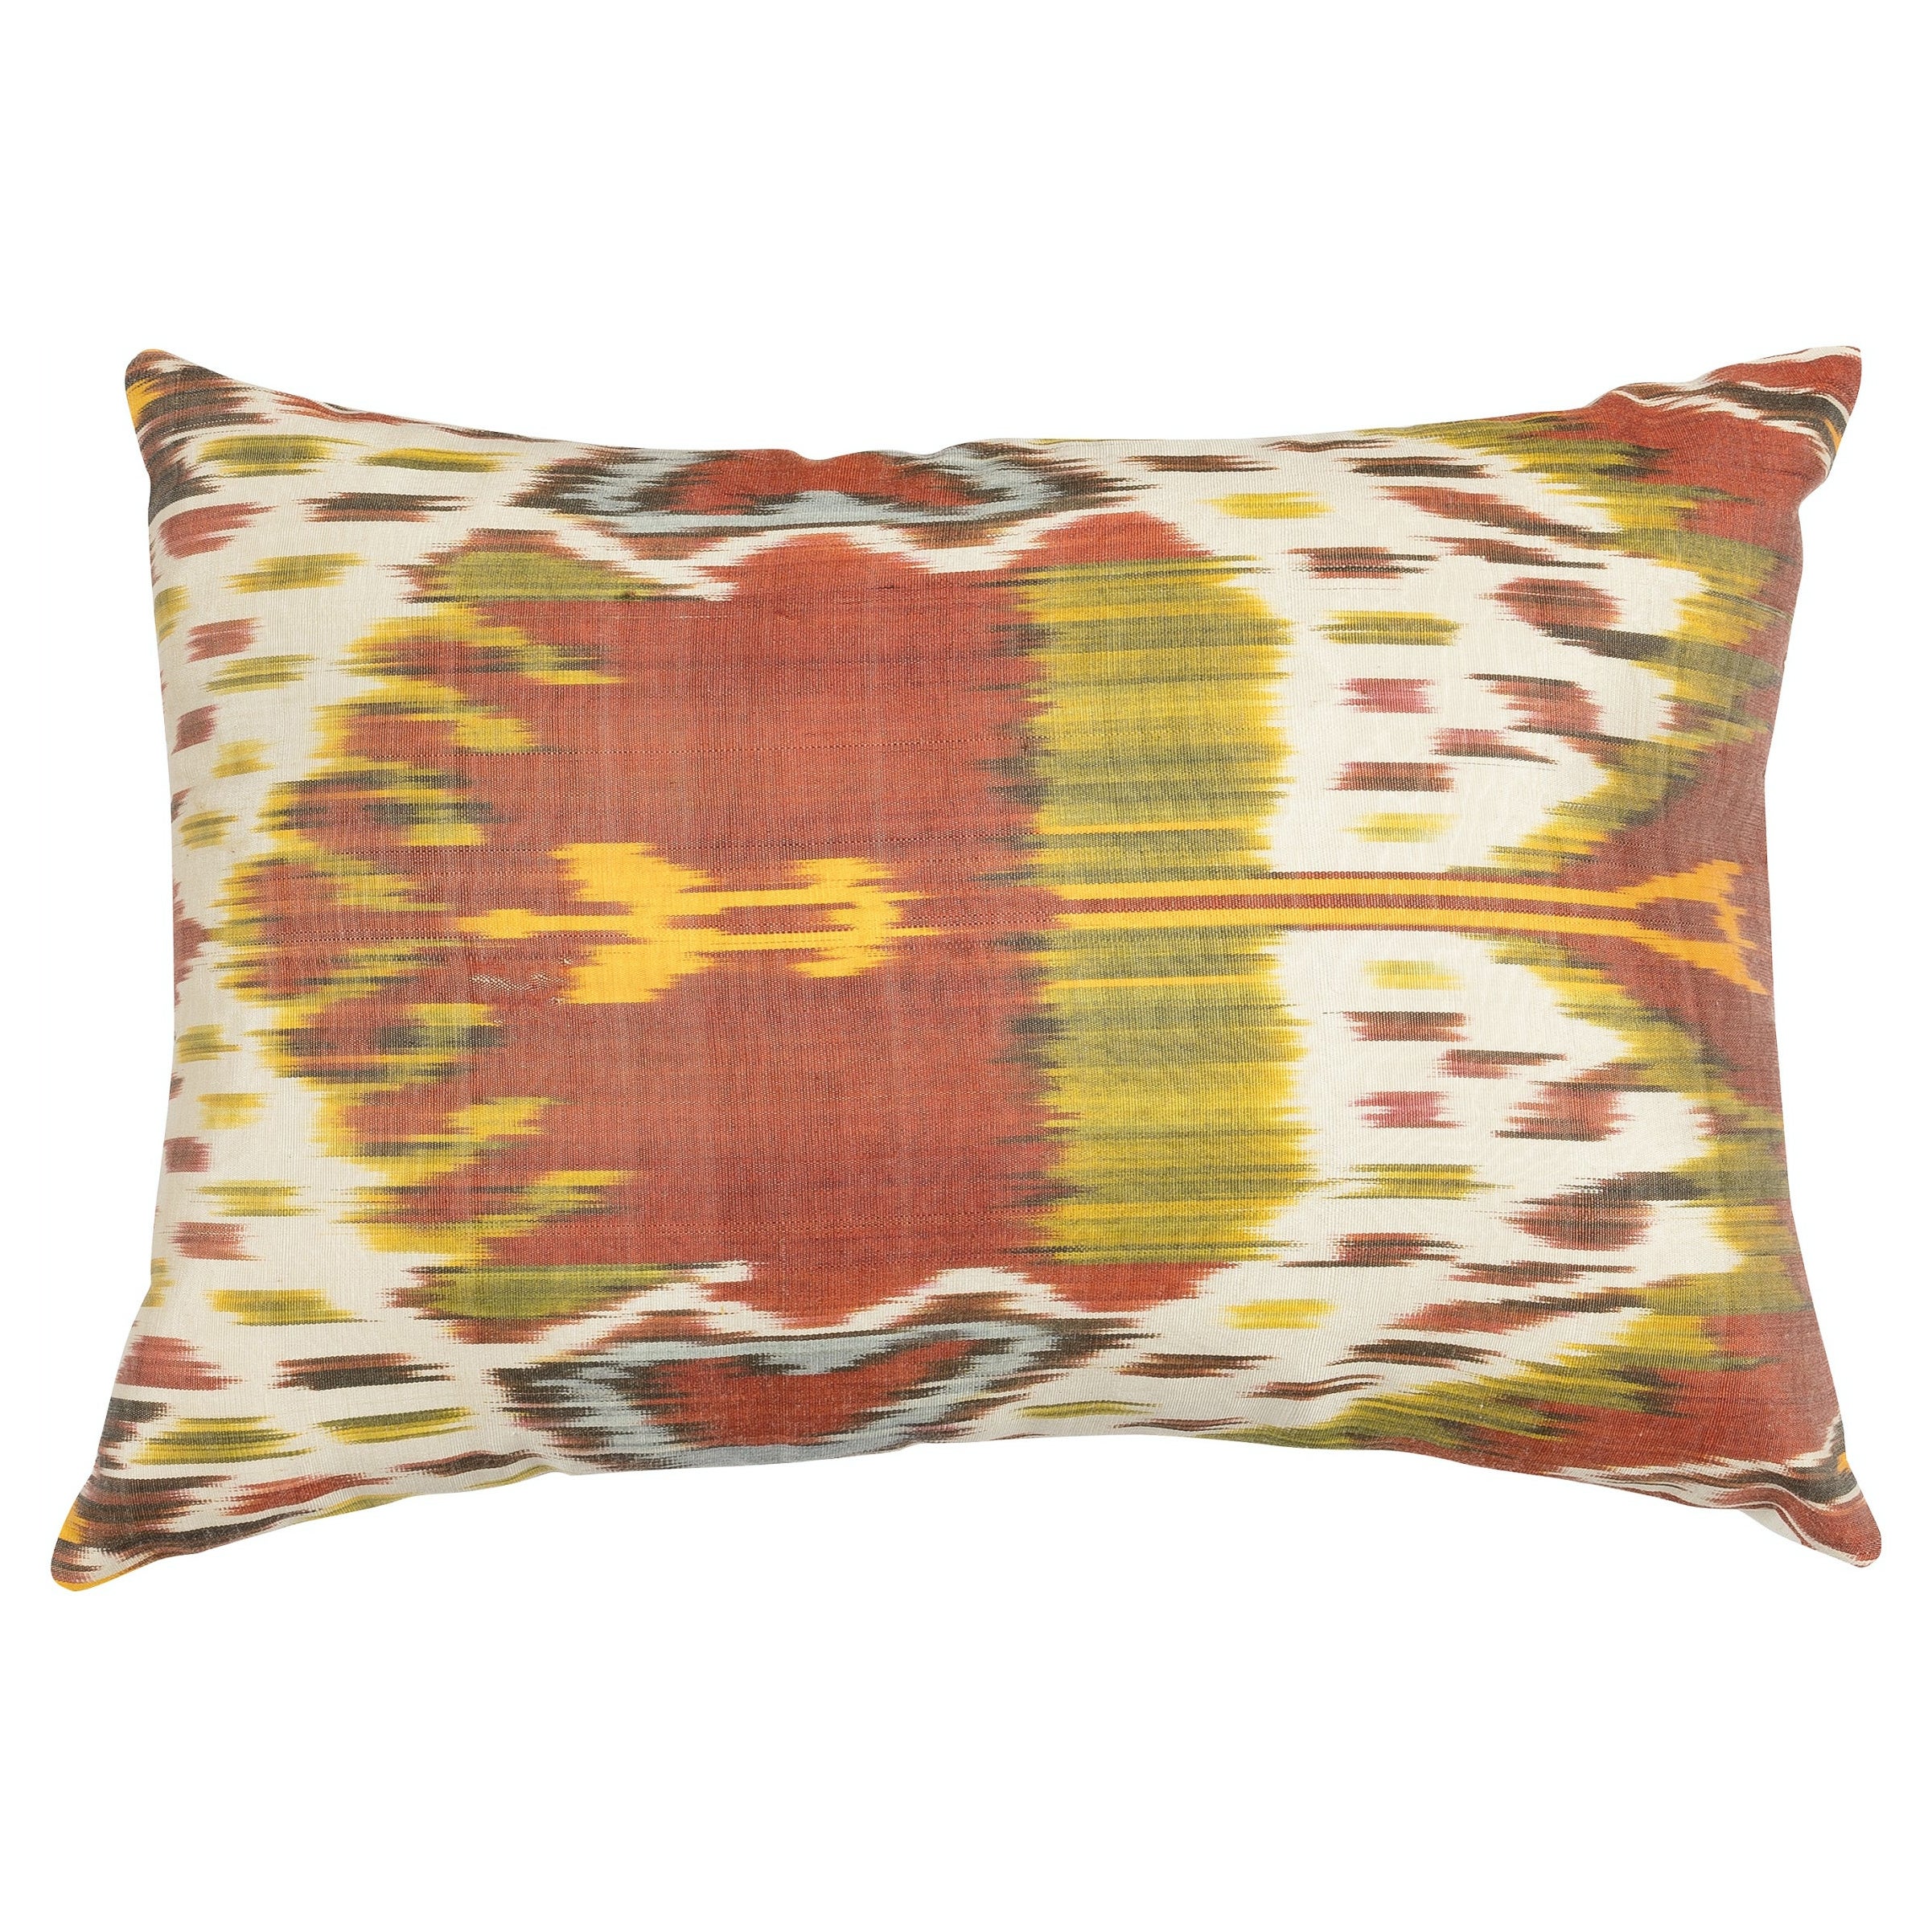 HandWoven Colorful Cushion Cover from All Cotton IKAT Fabric, Vintage Pillowcase For Sale